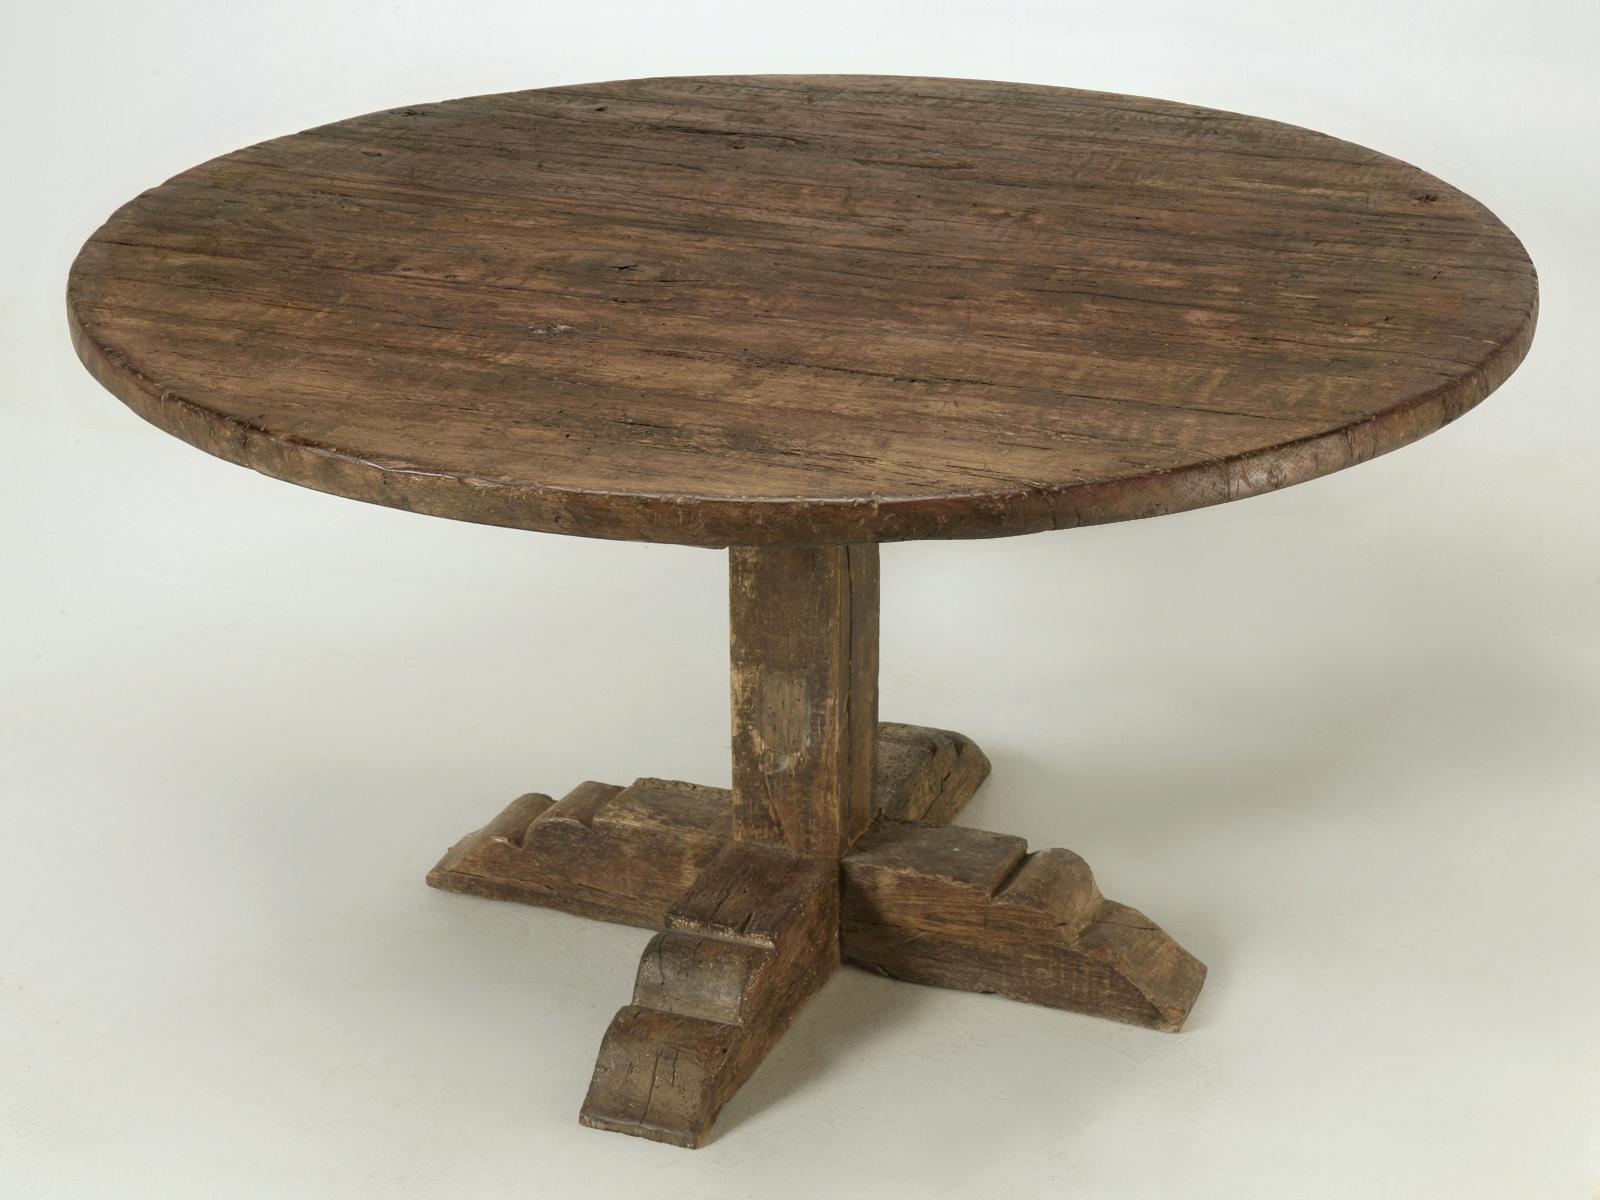 Our Old Plank Dining Room Table is an authentic reproduction of a circa 1840 Italian Round Dining or Kitchen Table and is constructed from reclaimed oak. Our Old Plank finishers used every ounce of their Artistry to make the Italian style Round